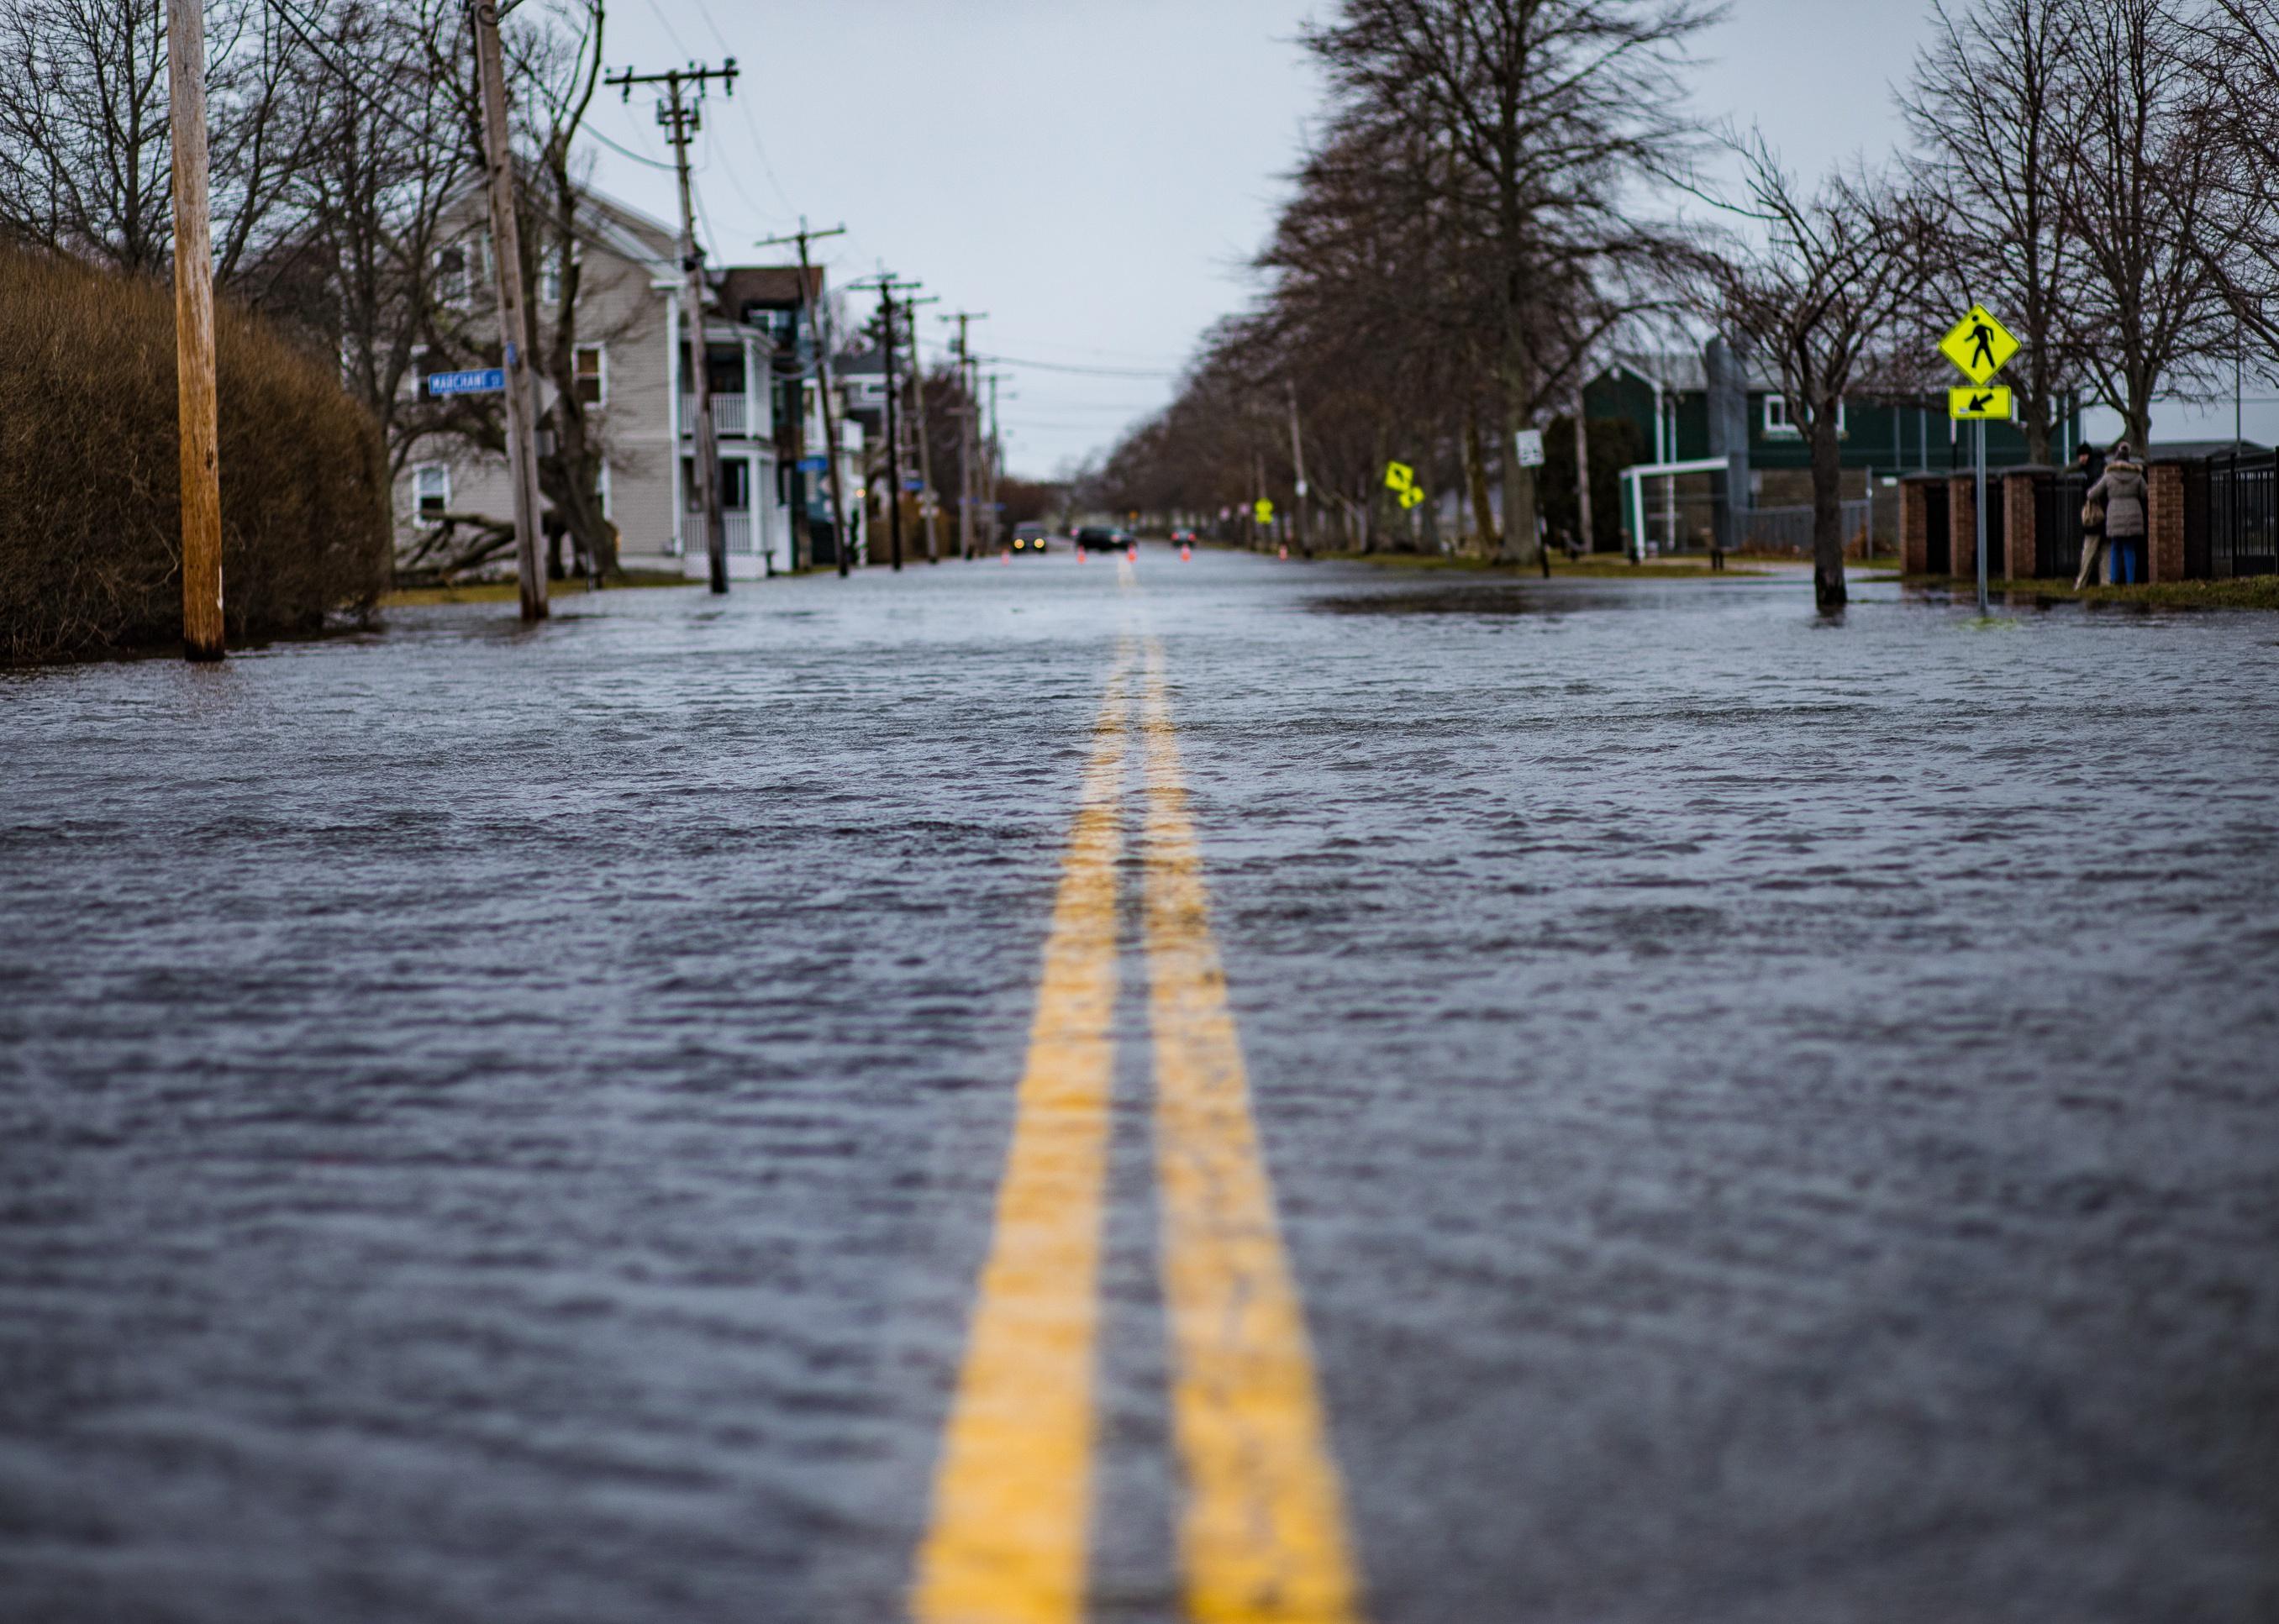 The flooded streets of Newport, Rhode Island after a storm.